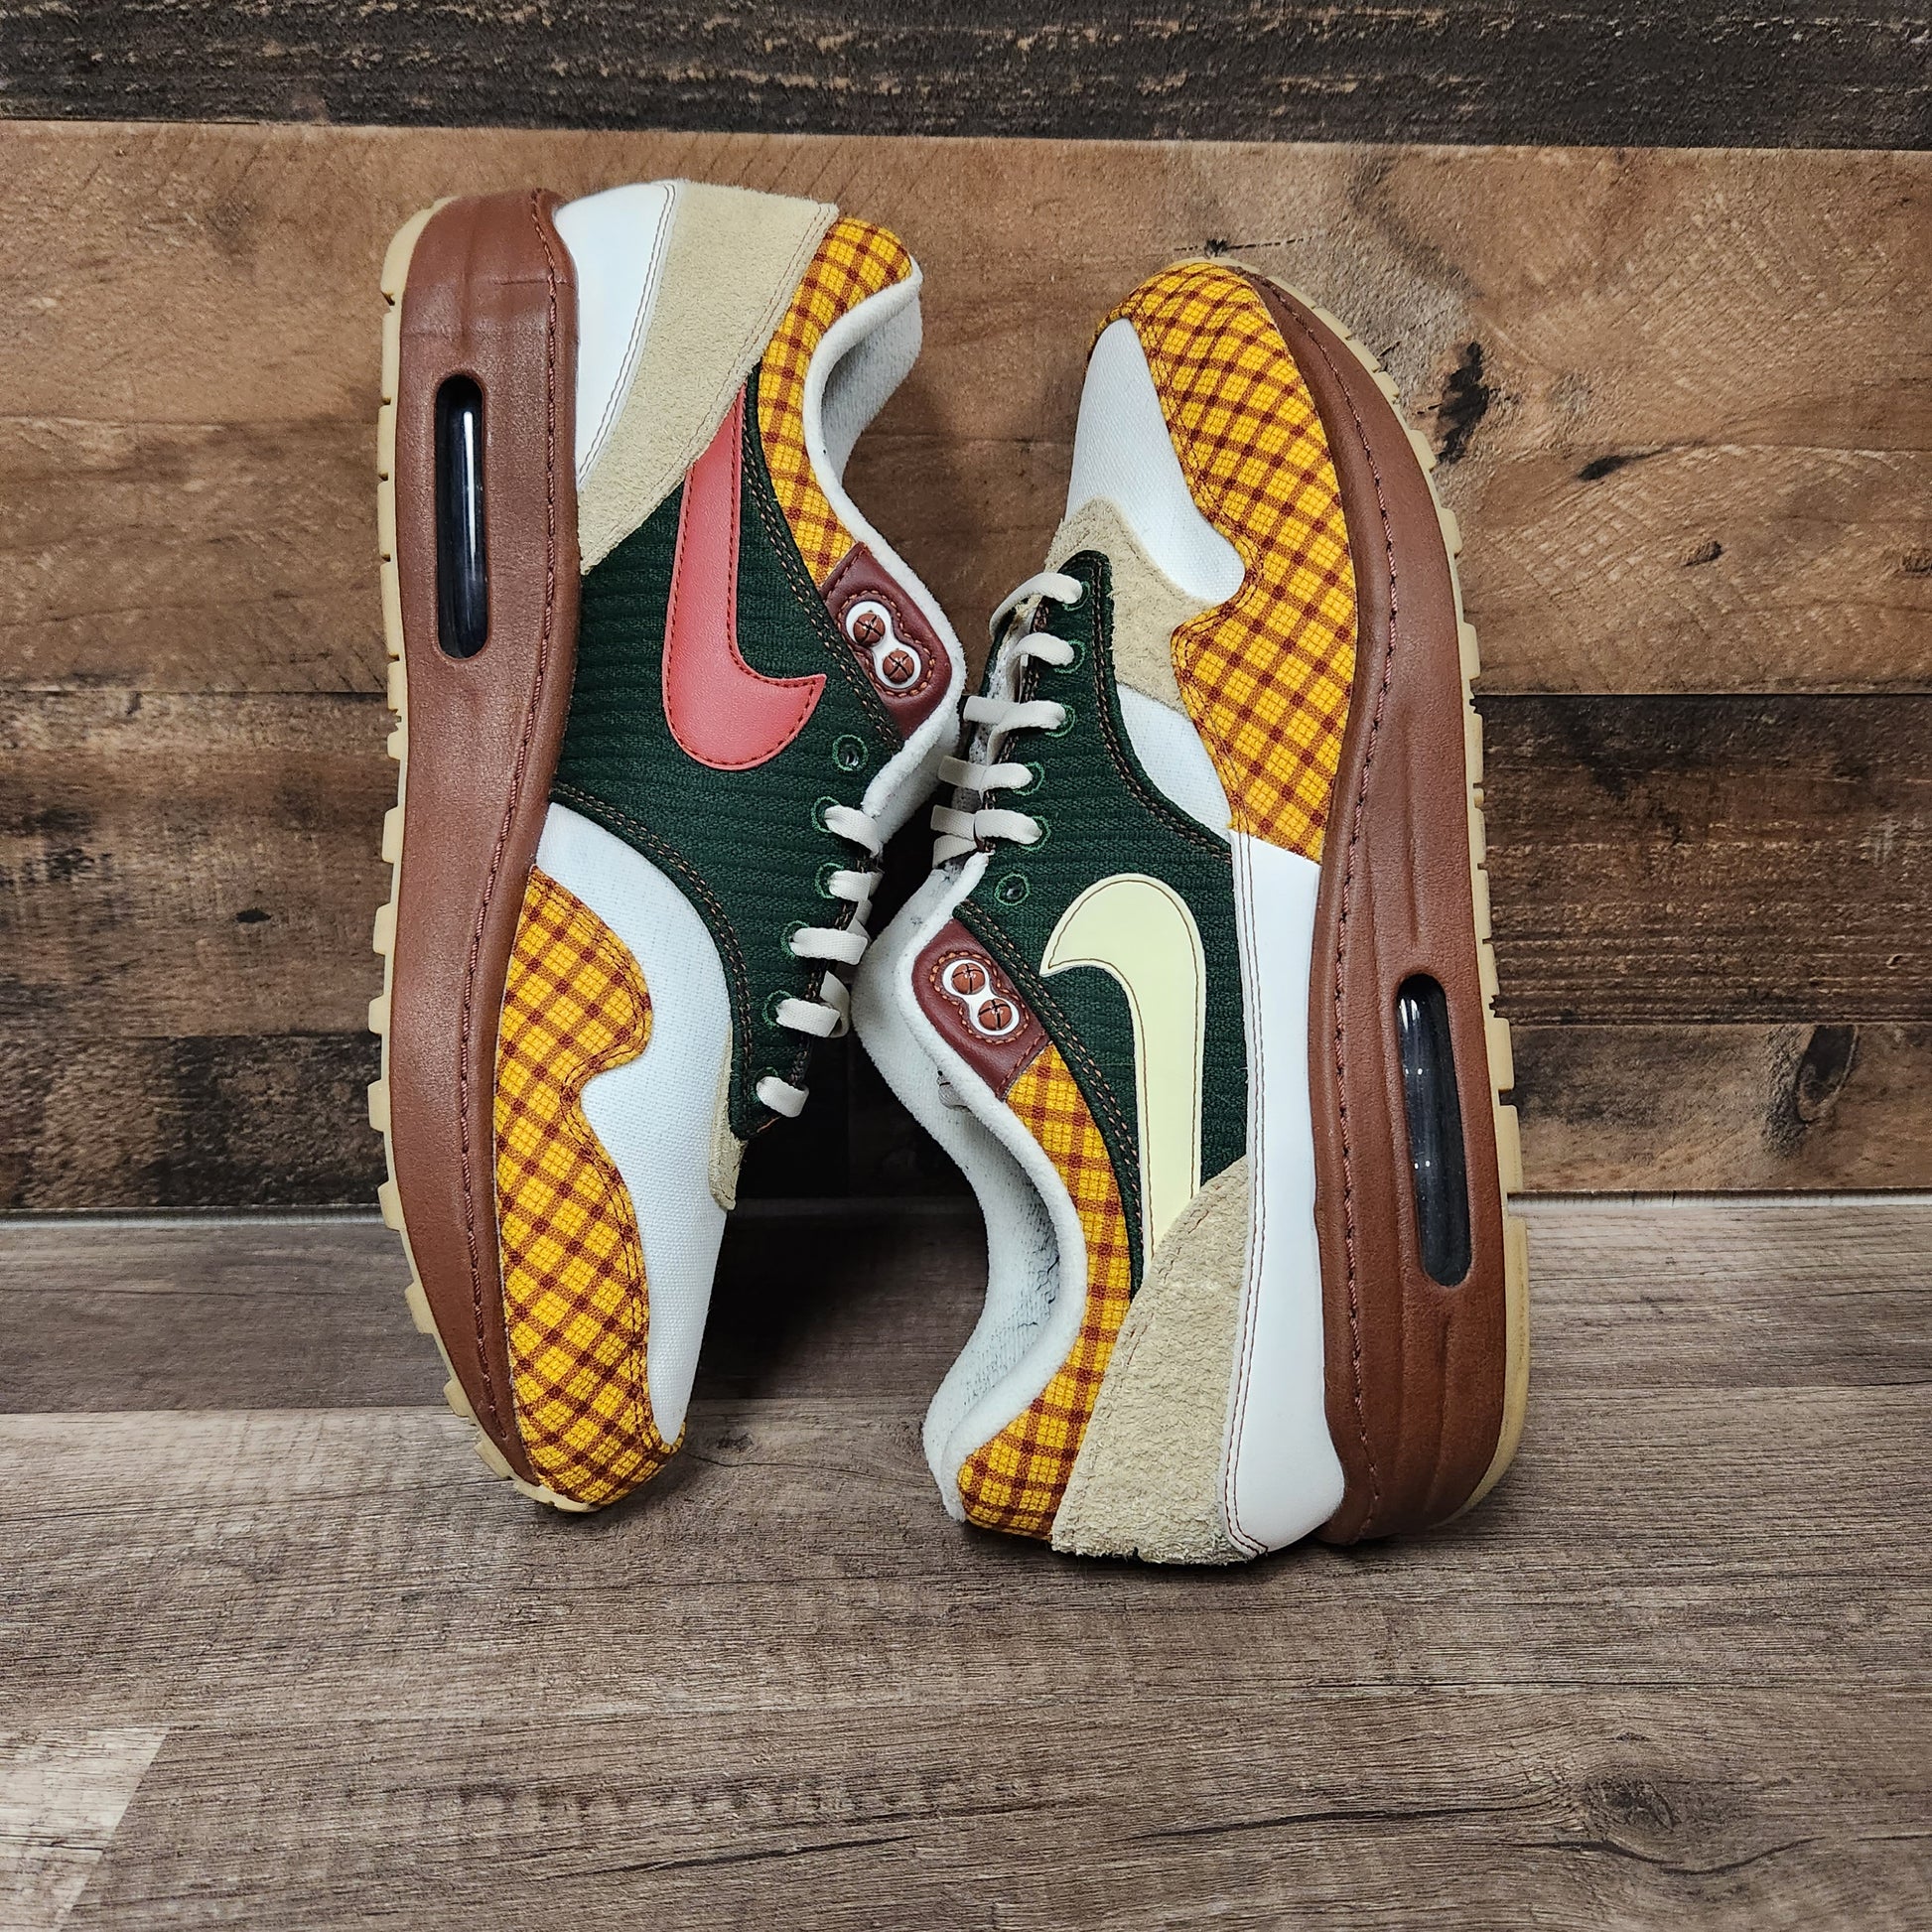 Nike Air Max Missing Link Susan – Yesterday's